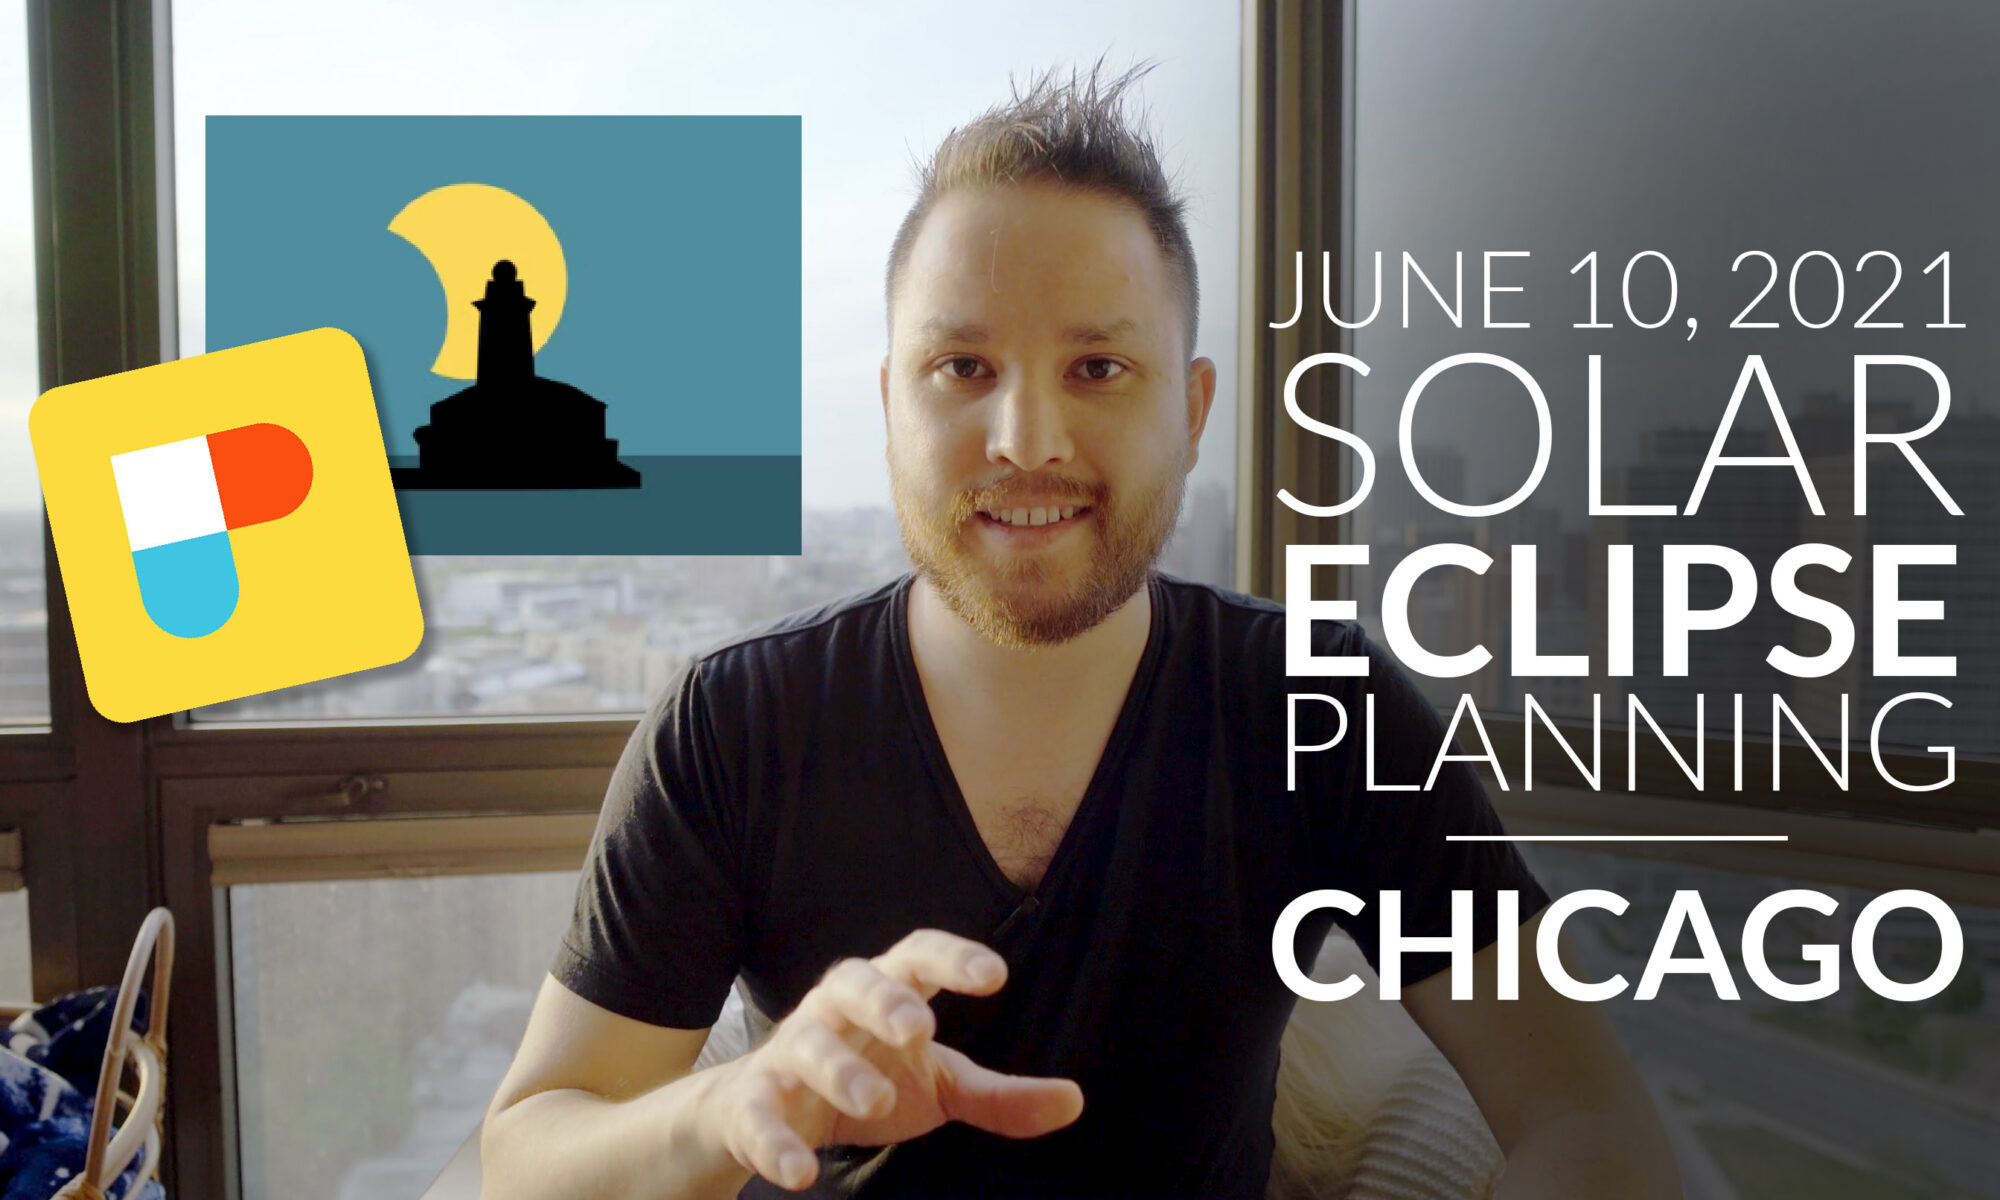 June 10, 2021 Solar Eclipse Planning in Chicago with PhotoPills